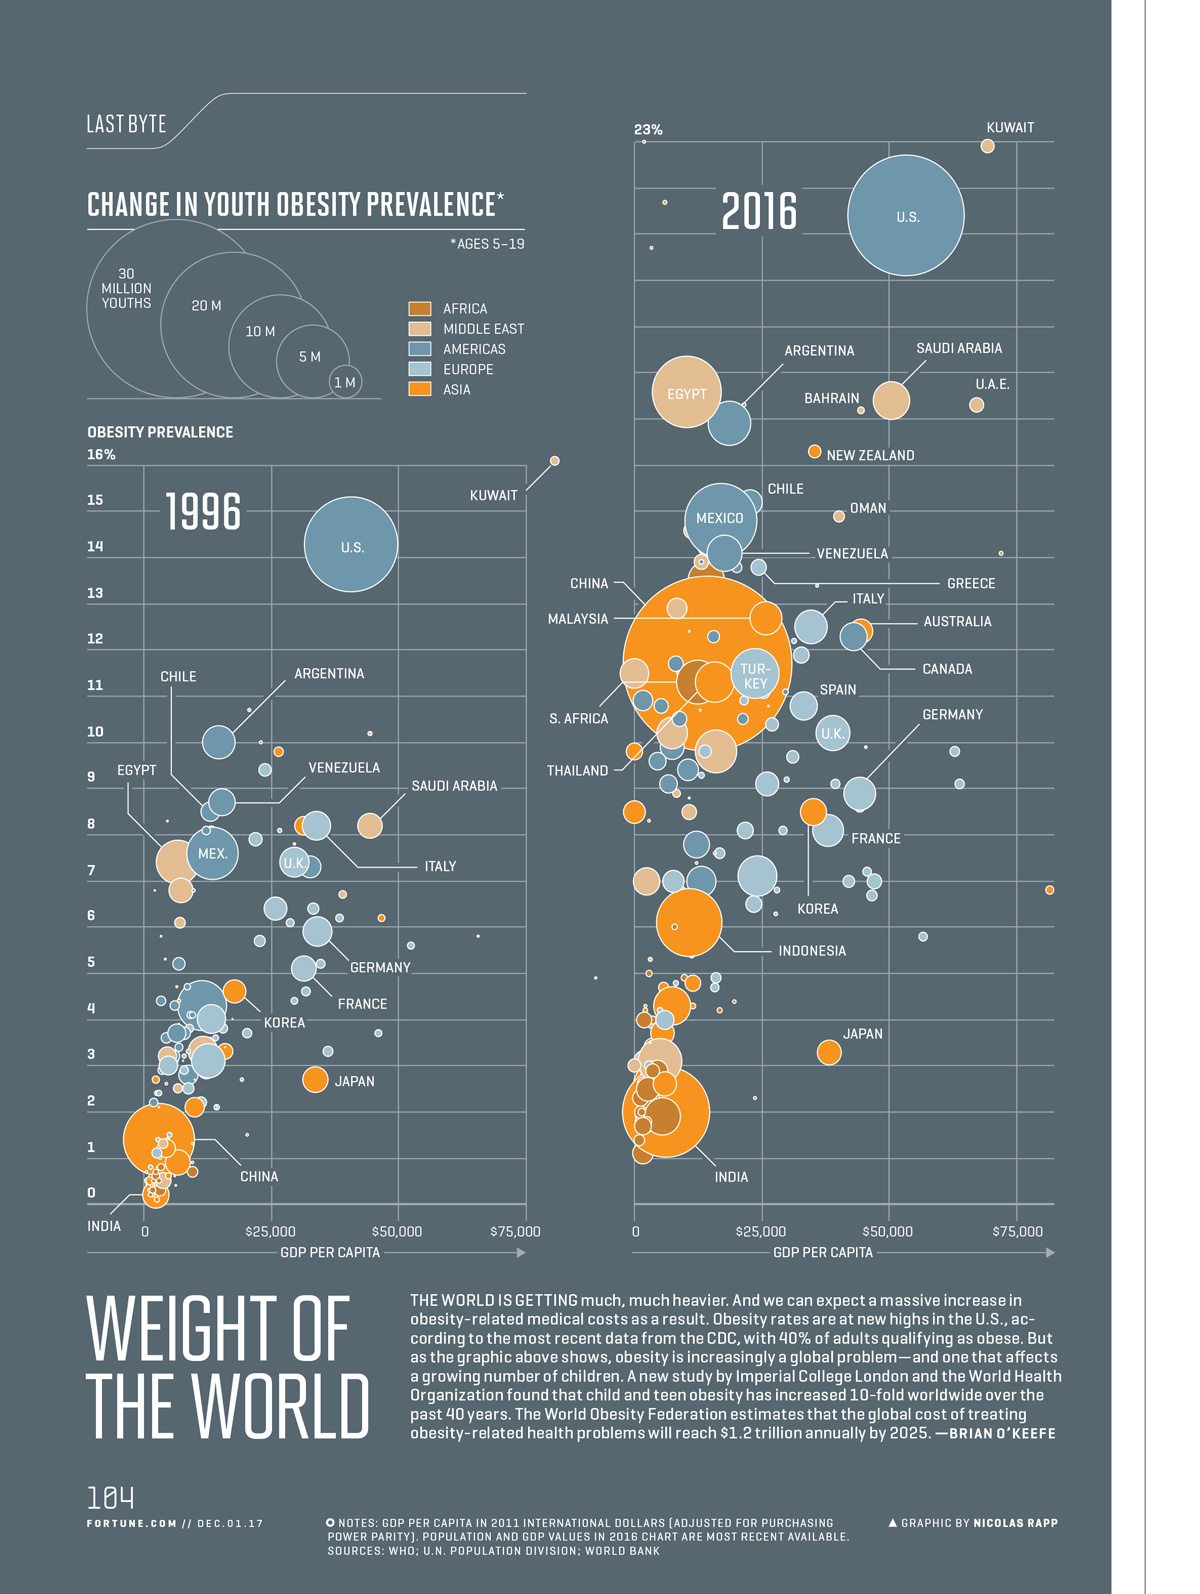 Infographic shows the change in youth obesity prevalence